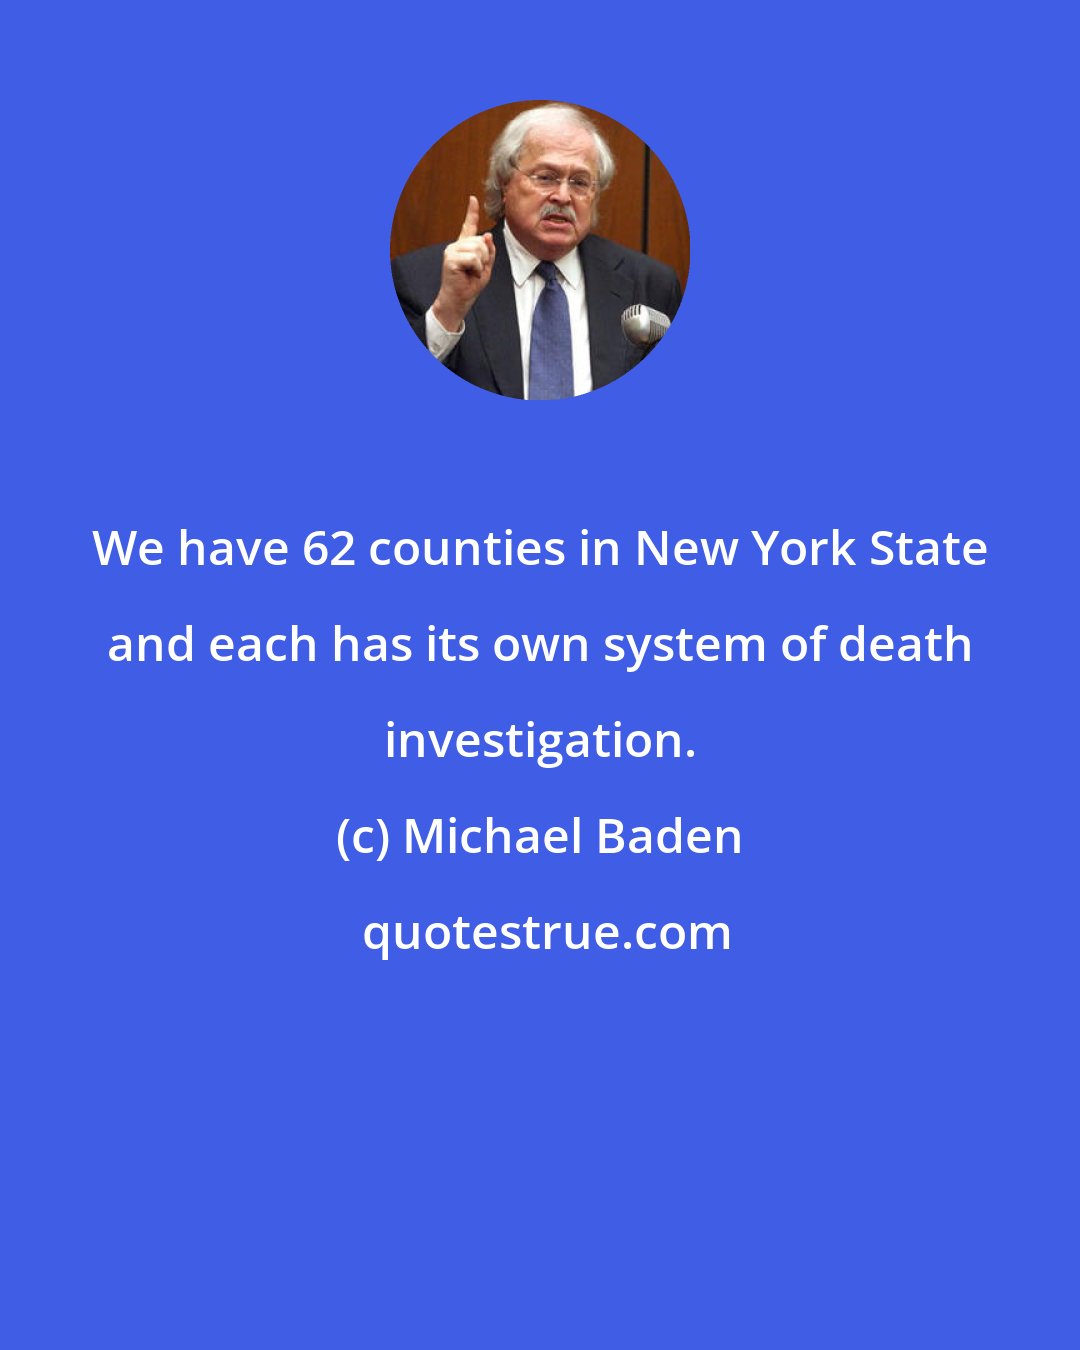 Michael Baden: We have 62 counties in New York State and each has its own system of death investigation.